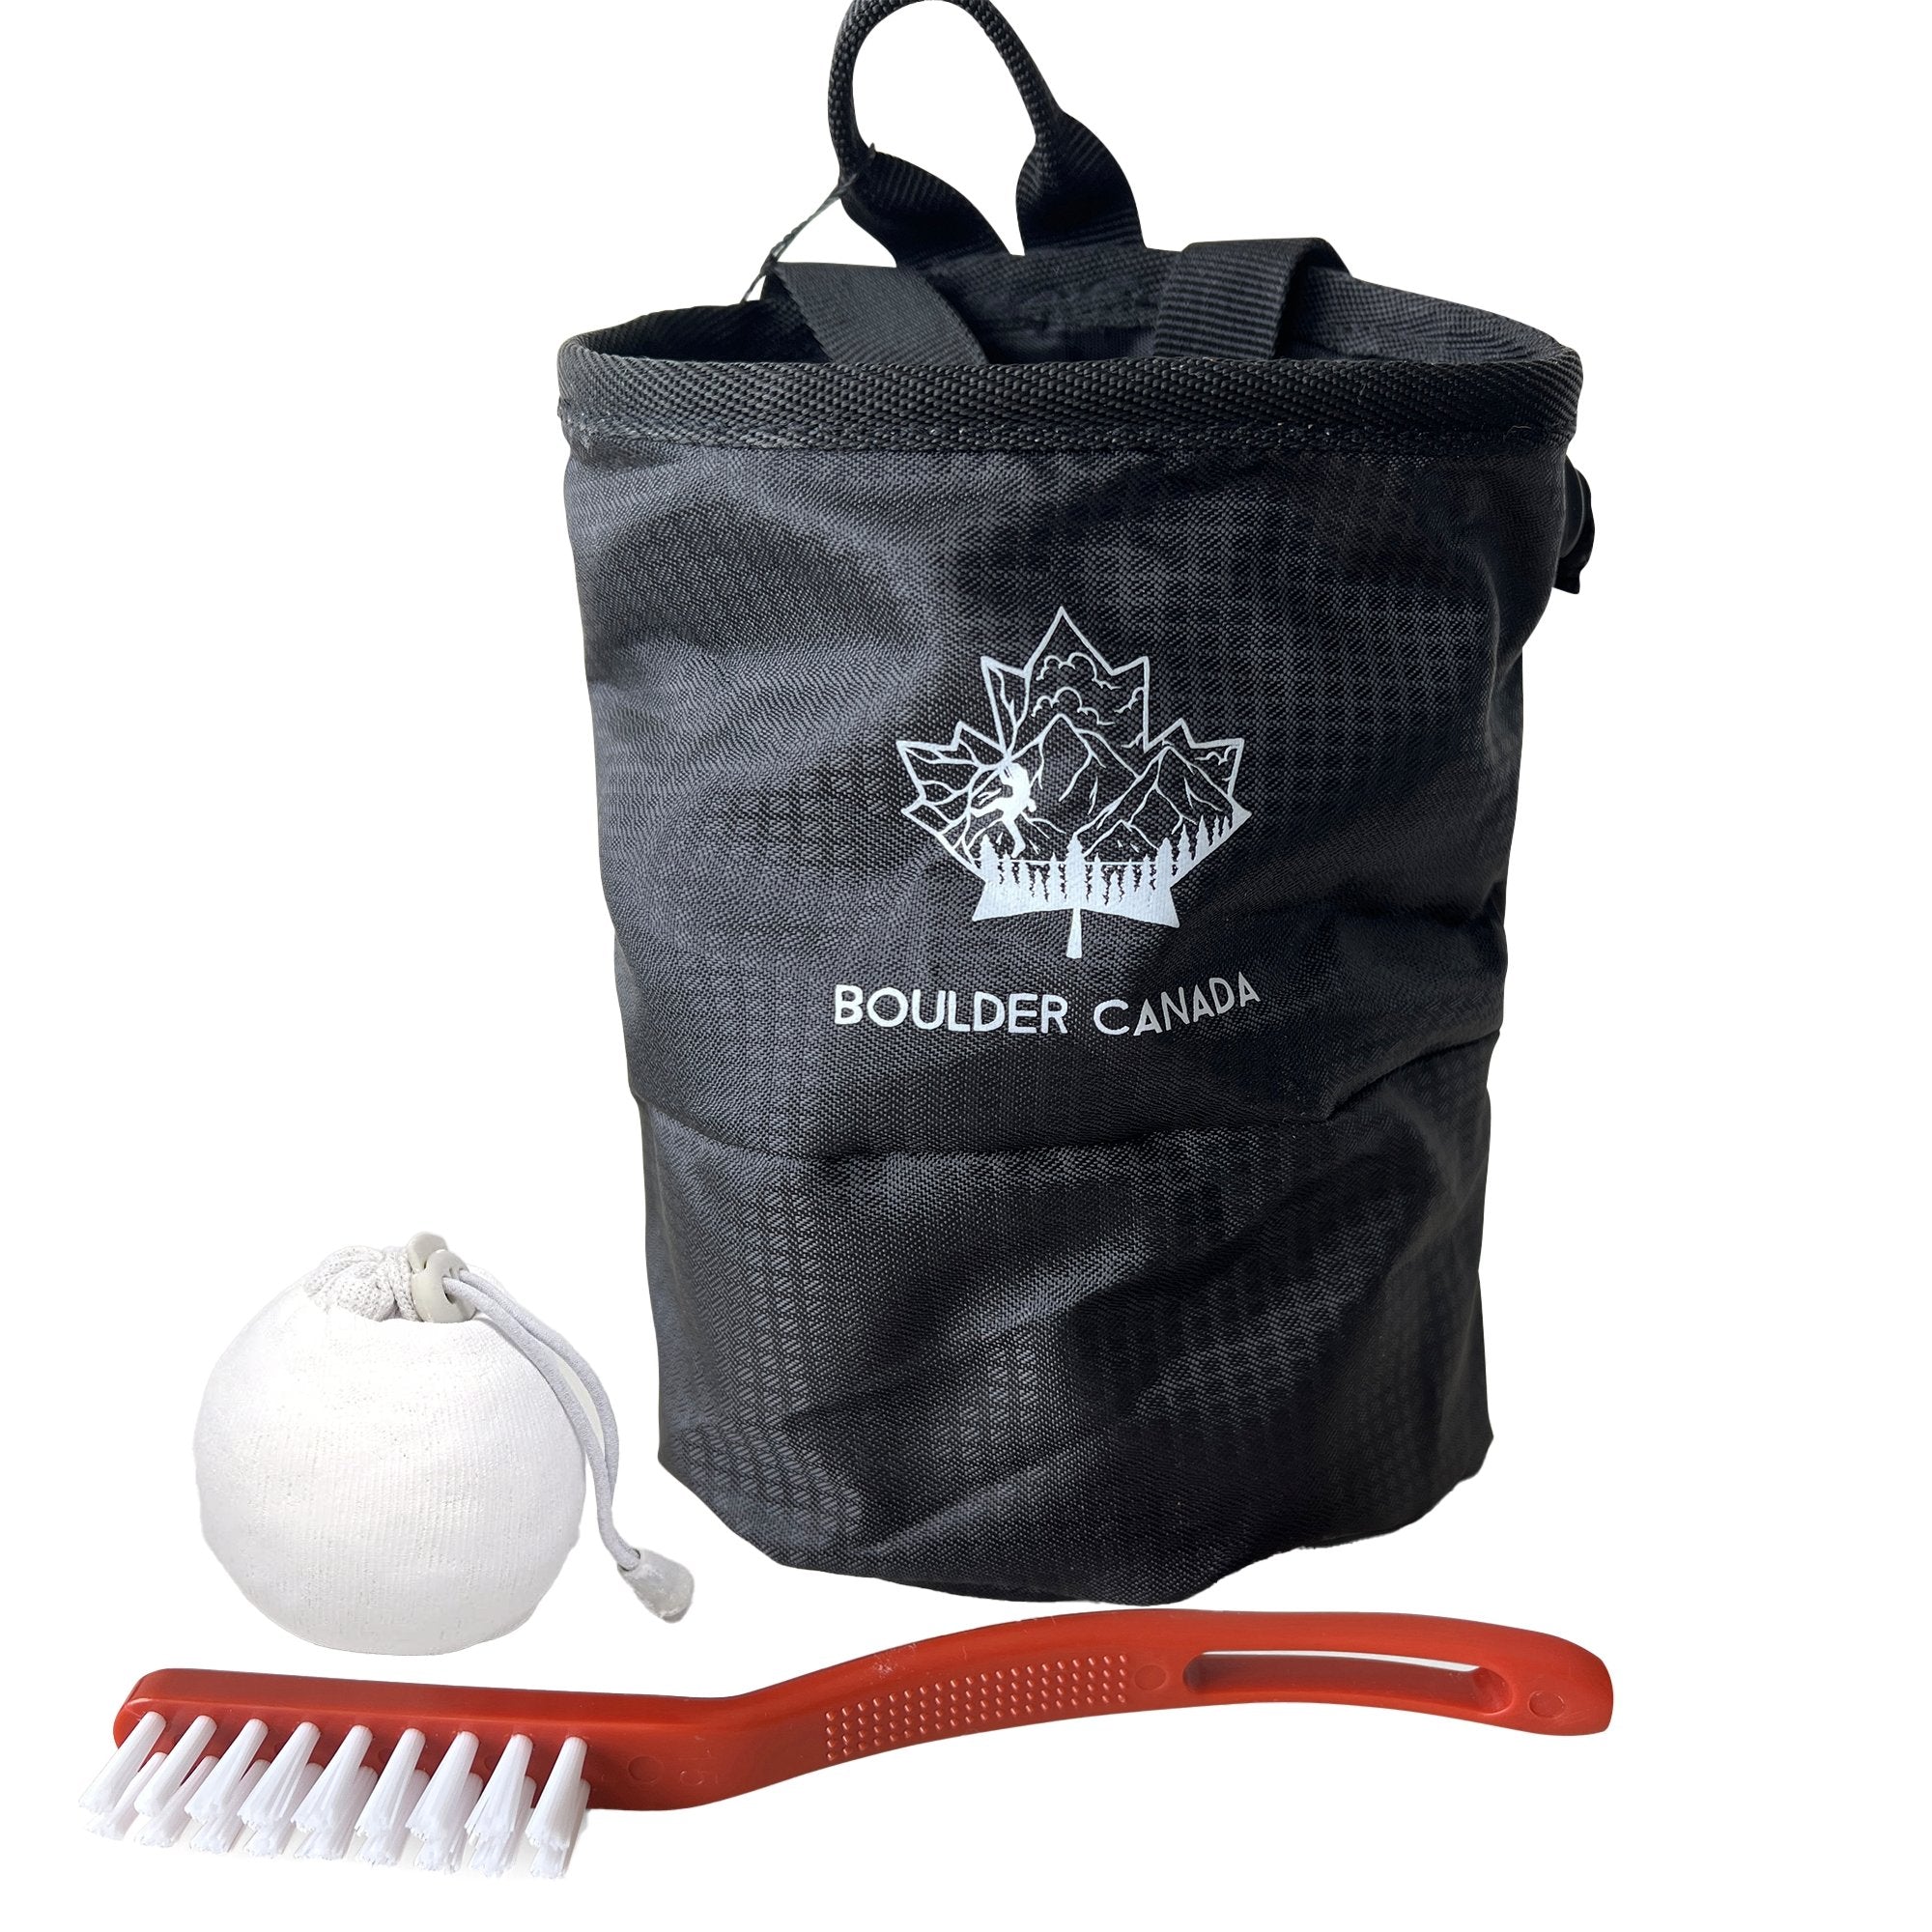 Get Climbing Starter Kit - Boulder Canada-Get Climbing Starter Kit - Boulder Canada-Chalk bag to store loose powdered chalk or chalk ball, used for rock climbing and bouldering comes equipped with a cleaning brush to clean holds as you climb. Boulder Canada refillable powdered chalk ball used for rock climbing, bouldering, weightlifting, gymnastics, and more. Improve grip and keeps your hands from slipping. Chalk ball can be refilled with loose powdered chalk.